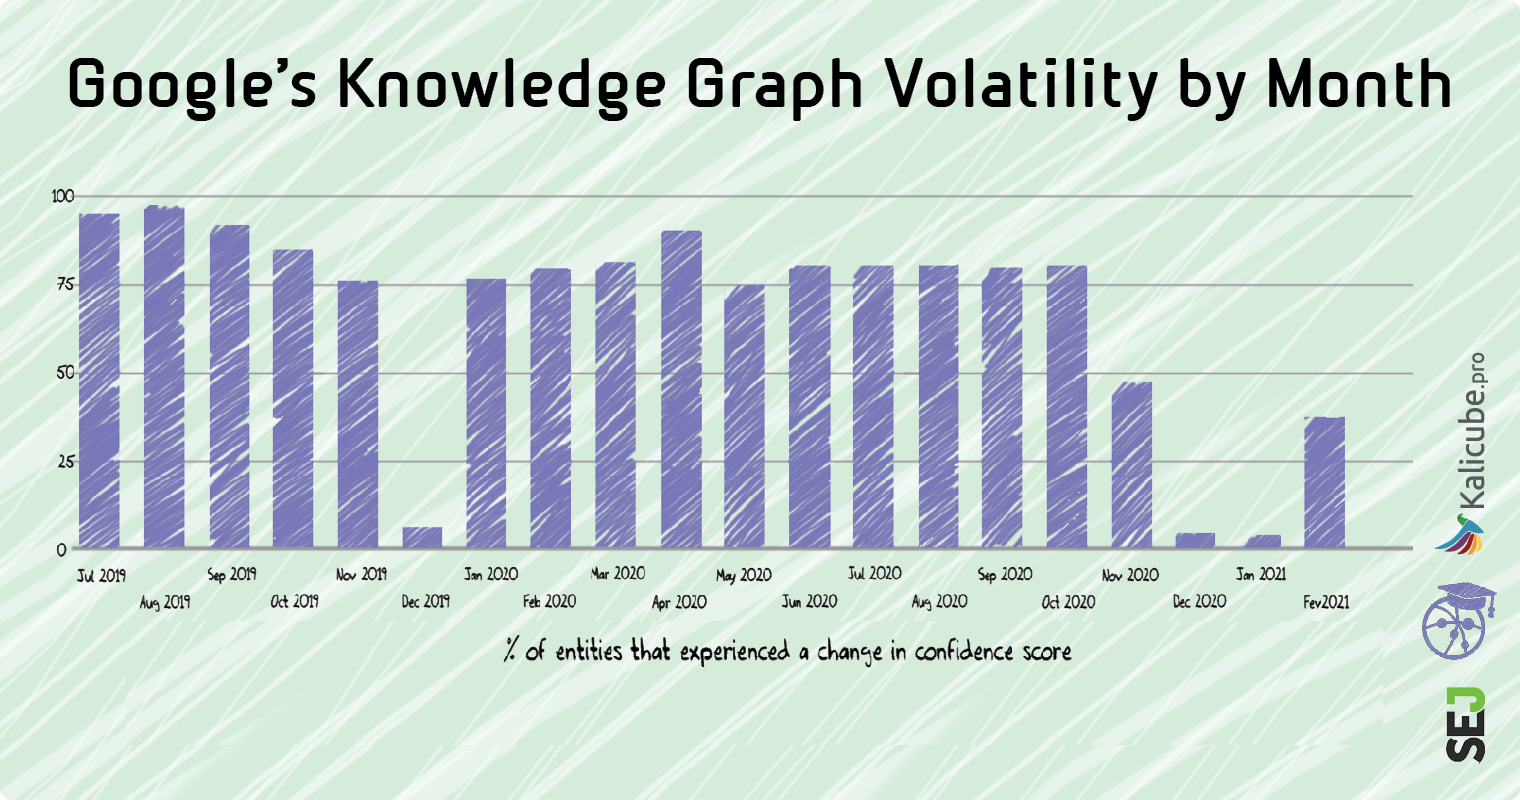 Google's Knowledge Graph Volatility by Month